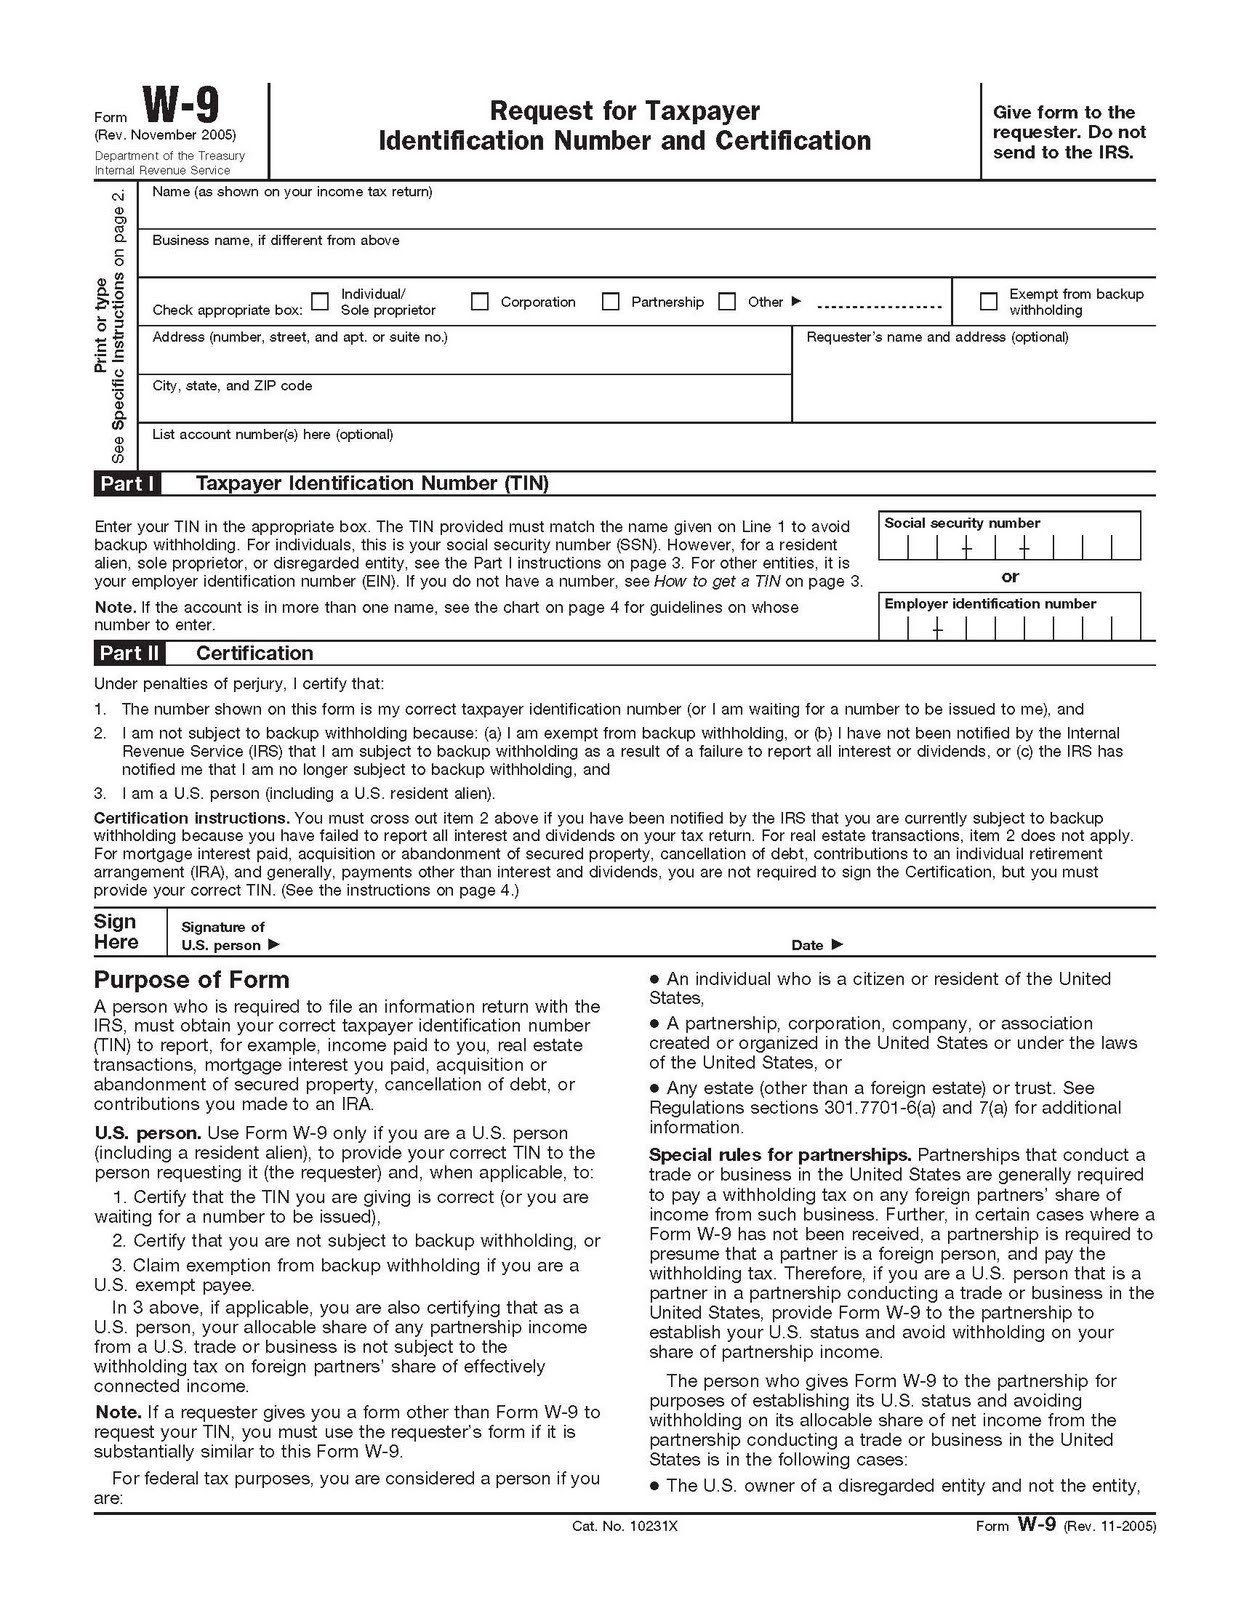 Downloadable Form W 9 Download W9 Form | Tax Forms, Irs-Blank W 9 Form 2021